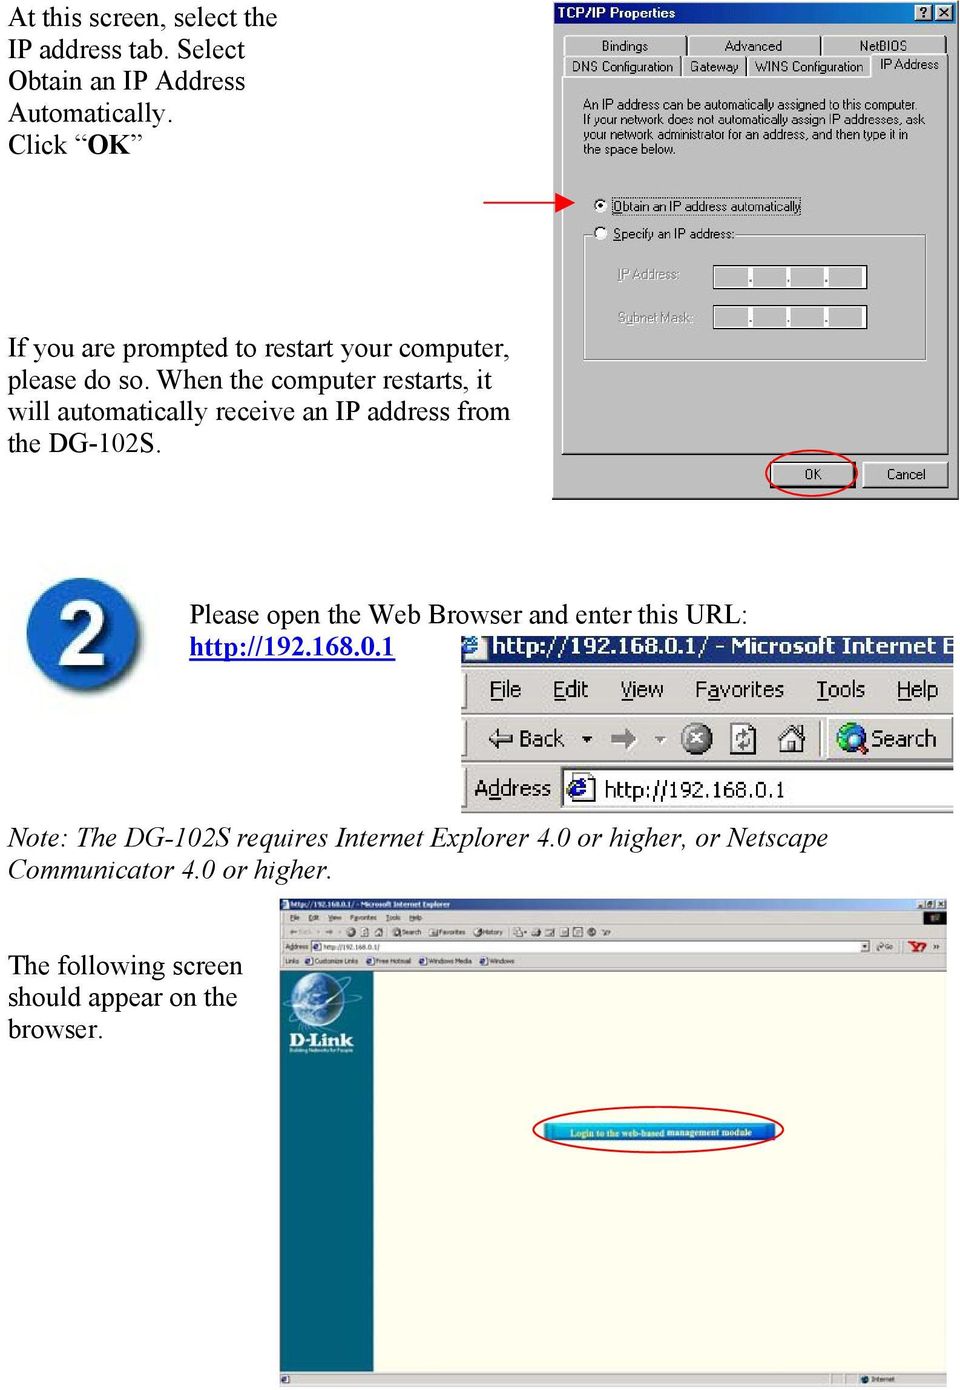 When the computer restarts, it will automatically receive an IP address from the DG-102S.